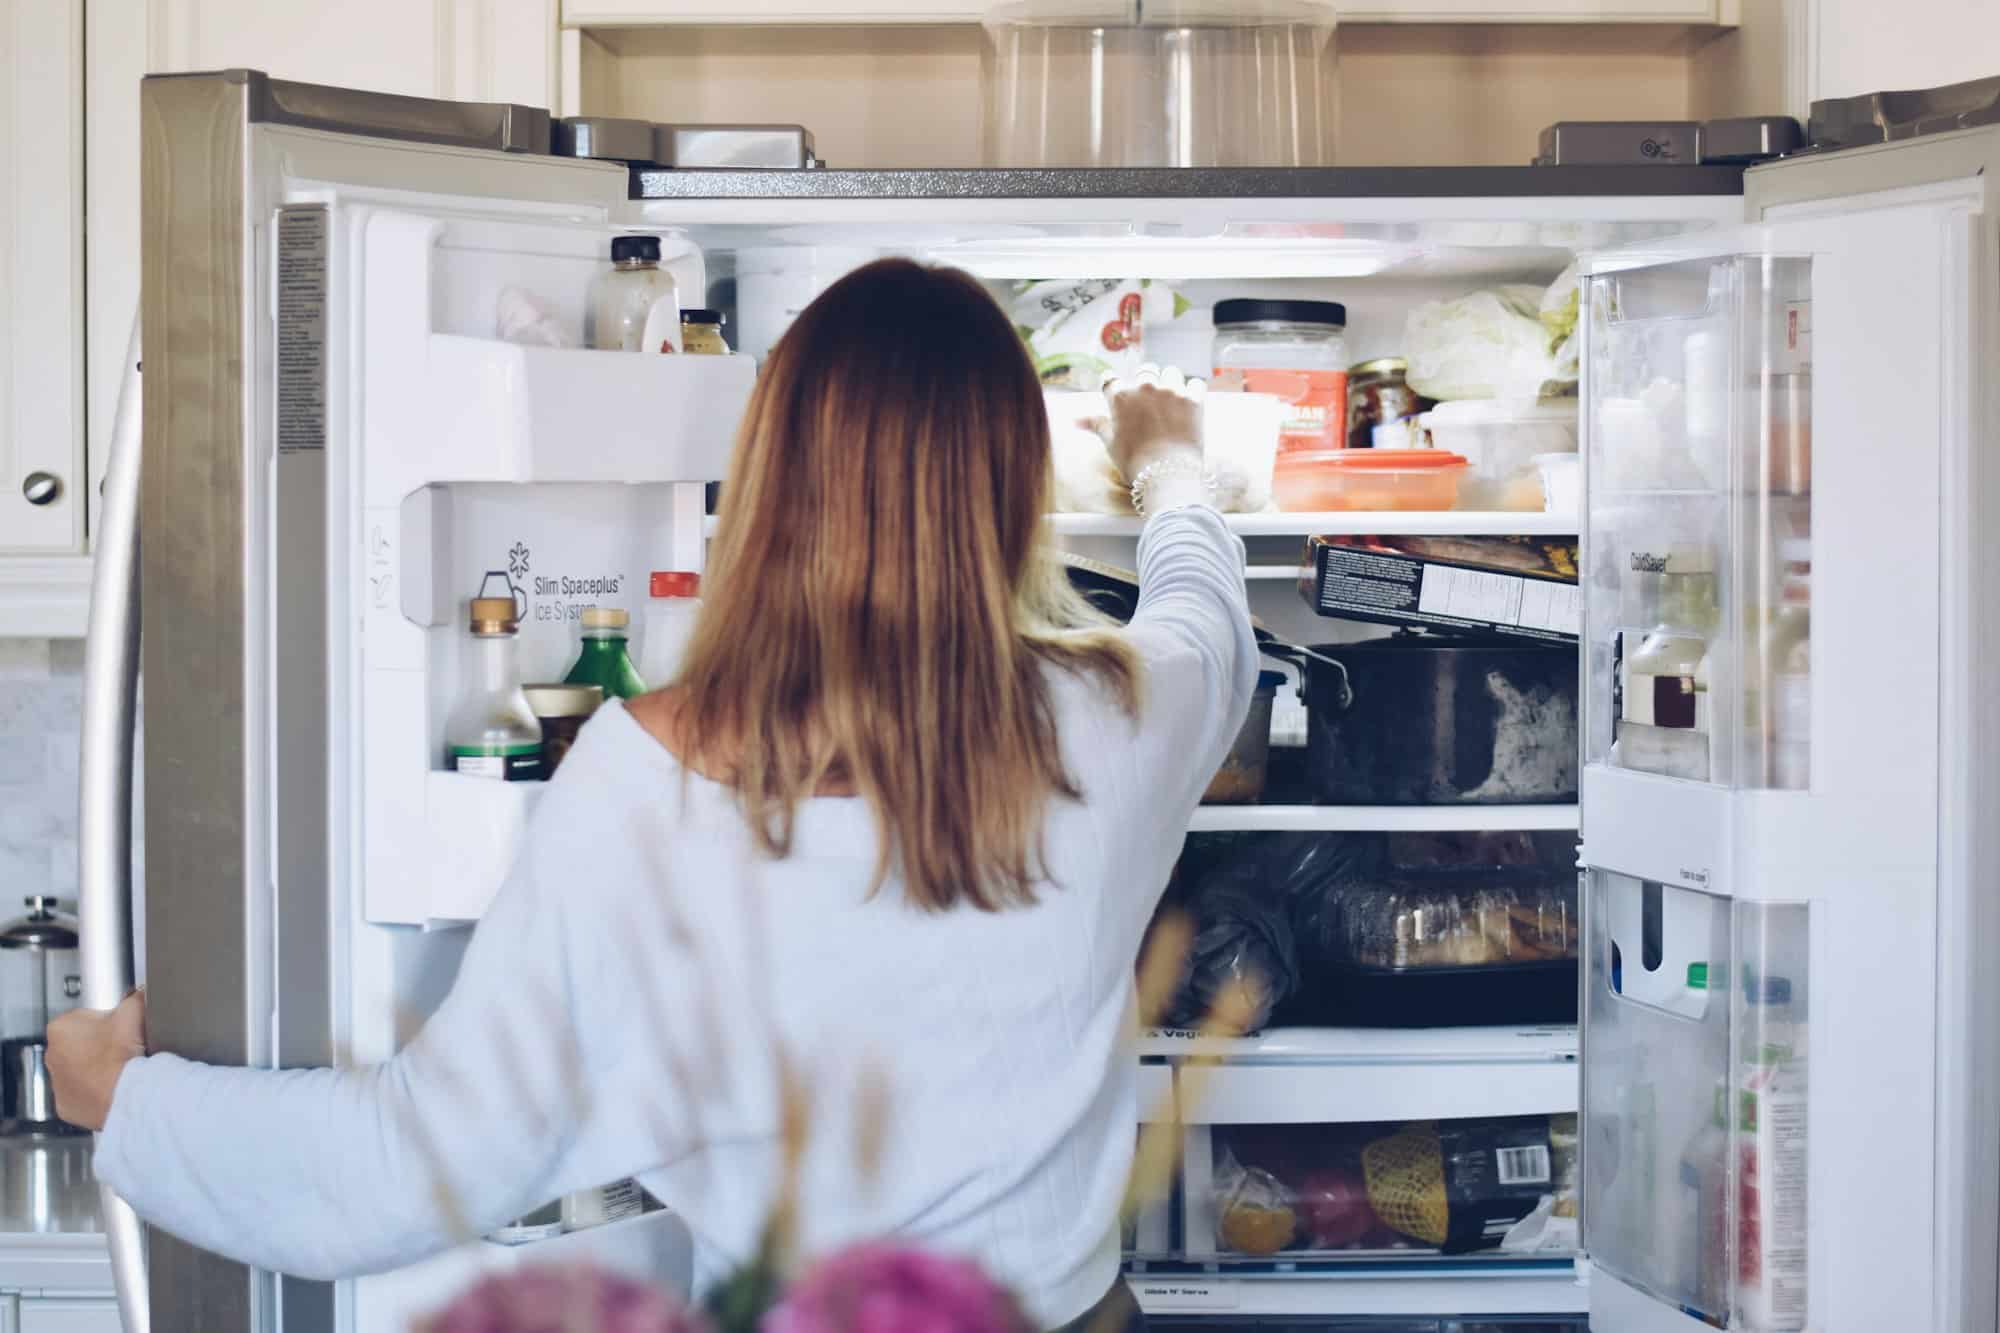 A woman takes her food from the other freezer lunches in the office fridge.